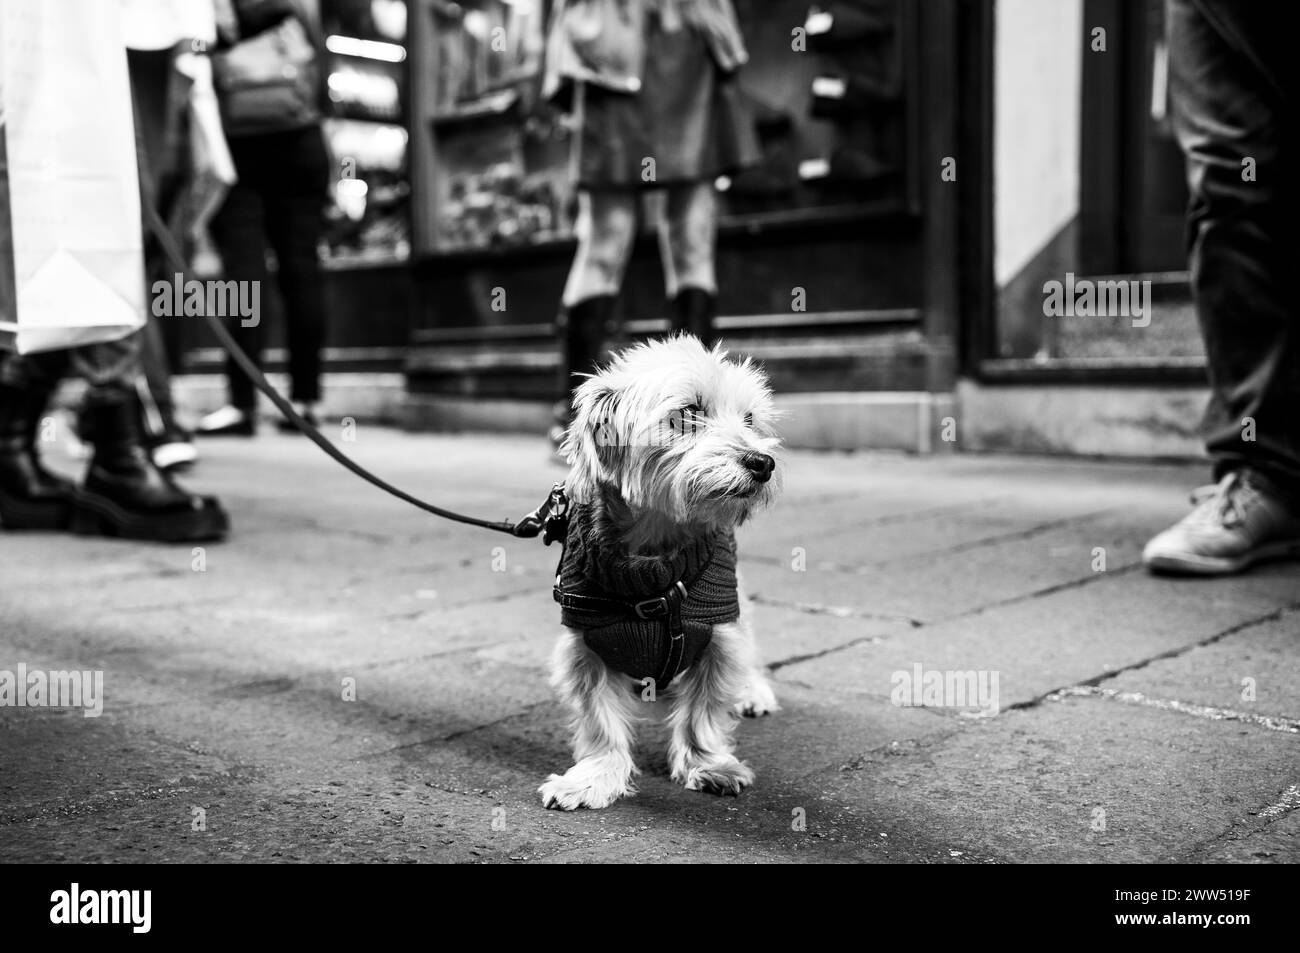 Little white terrier dog exploring the city streets, its gaze sharp amidst the urban hustle. Black and white capture contrasts the animal's innocence Stock Photo